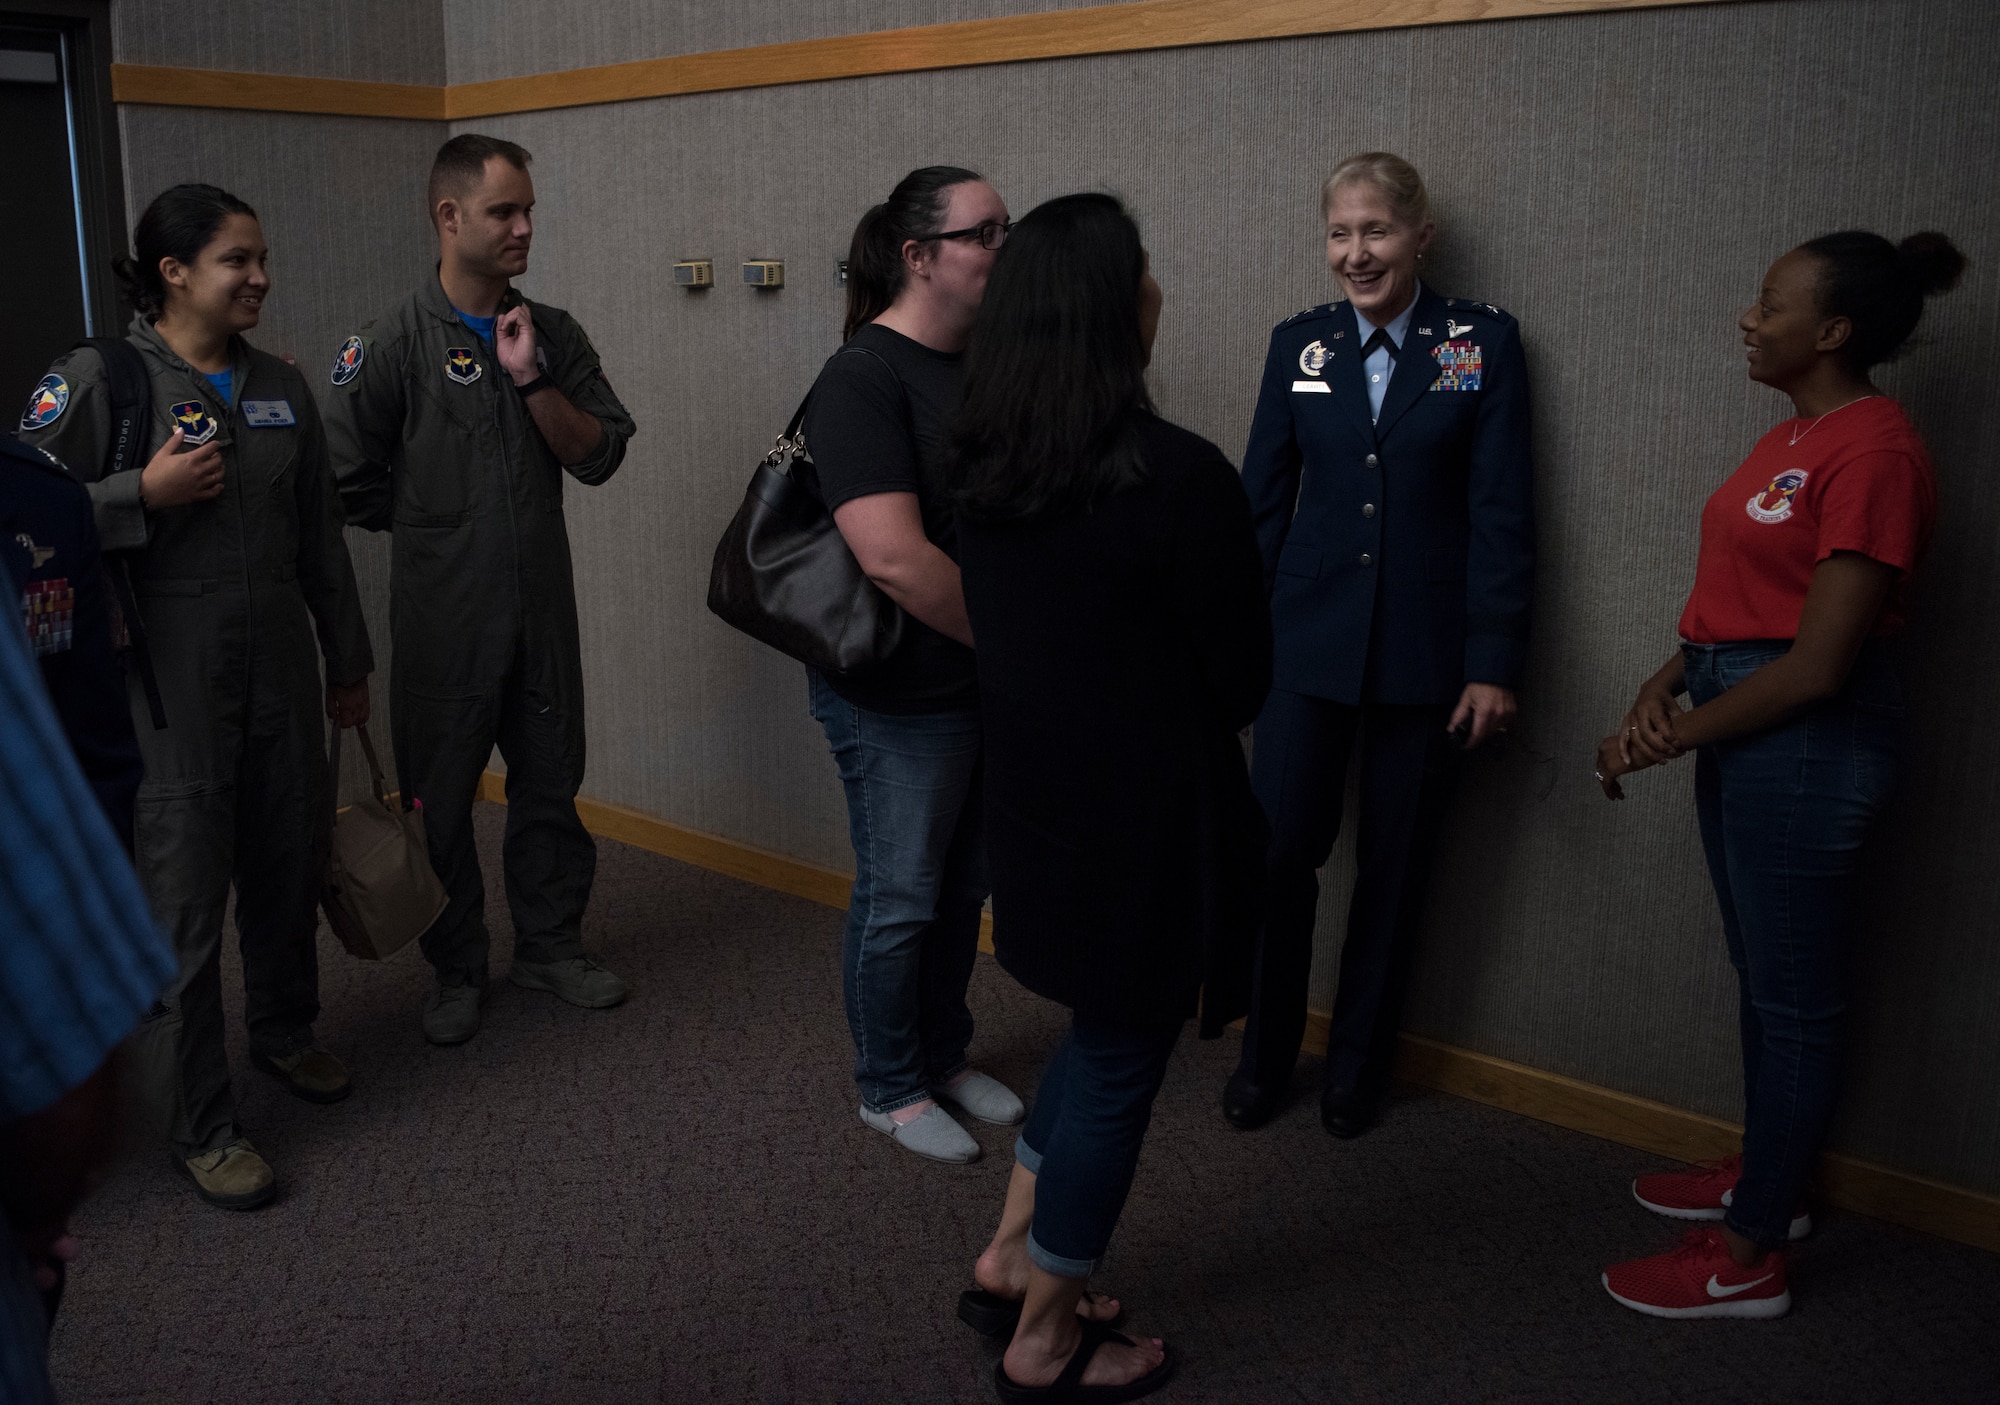 Maj. Gen. Jeannie Leavitt, Air Force Recruiting Service commander, connects with attendees of Specialized Undergraduate Pilot Training class 19-25’s graduation ceremony at Laughlin Air Force Base, Texas, Spet. 27, 2019. Leavitt returned to Laughlin to speak at SUPT class 19-25’s graduation, sharing advice to the graduates. “Work hard, live our core values, and be ready to run through that door when opportunity presents itself,” she said. (U.S. Air Force photo by Staff Sgt. Benjamin N. Valmoja)